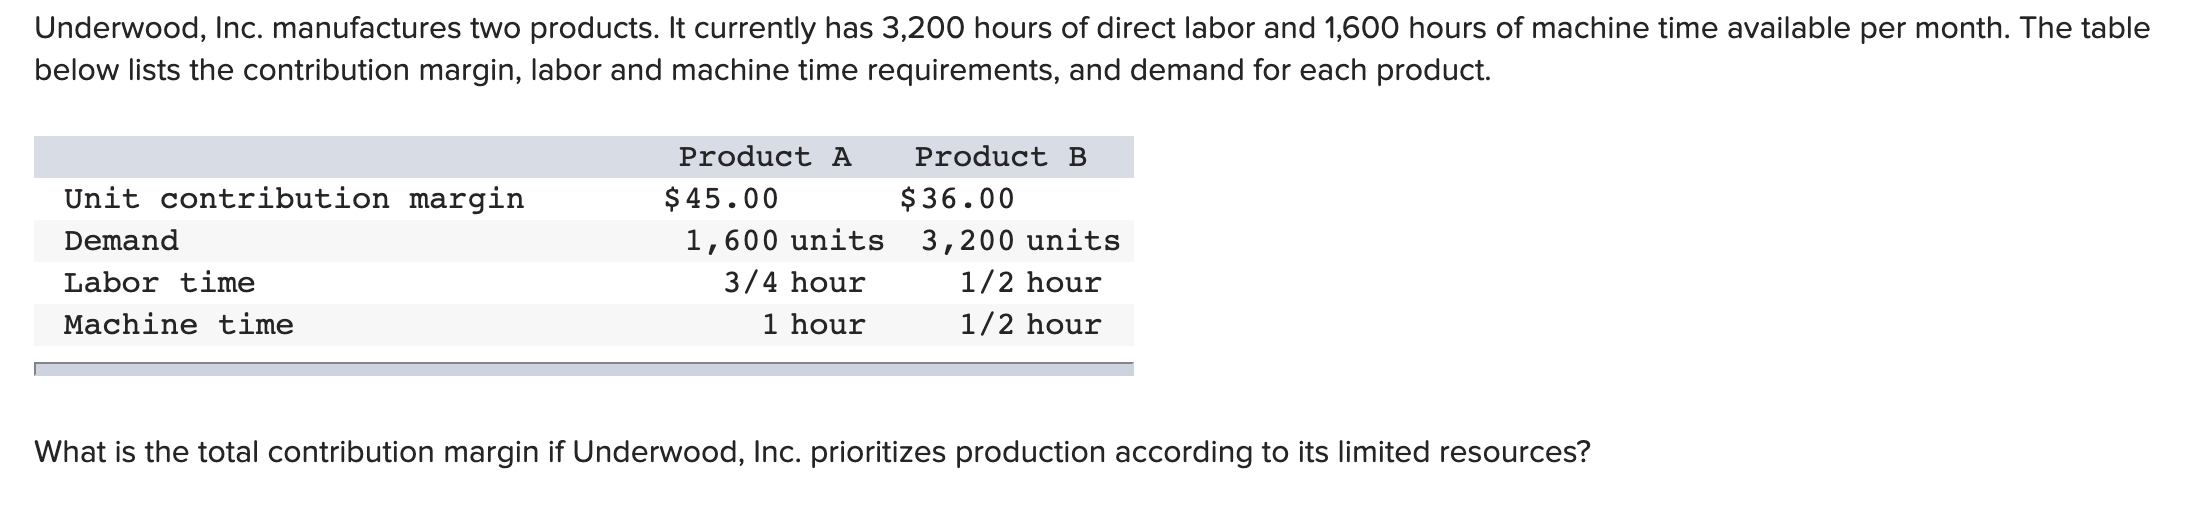 Underwood, Inc. manufactures two products. It currently has 3,200 hours of direct labor and 1,600 hours of machine time available per month. The table
below lists the contribution margin, labor and machine time requirements, and demand for each product.
Product A
Product B
Unit contribution margin
$ 45.00
$36.00
Demand
1,600 units 3,200 units
Labor time
3/4 hour
1/2 hour
Machine time
1 hour
1/2 hour
What is the total contribution
argin if Underwood, Inc. prioritizes production according to its limited resources?
